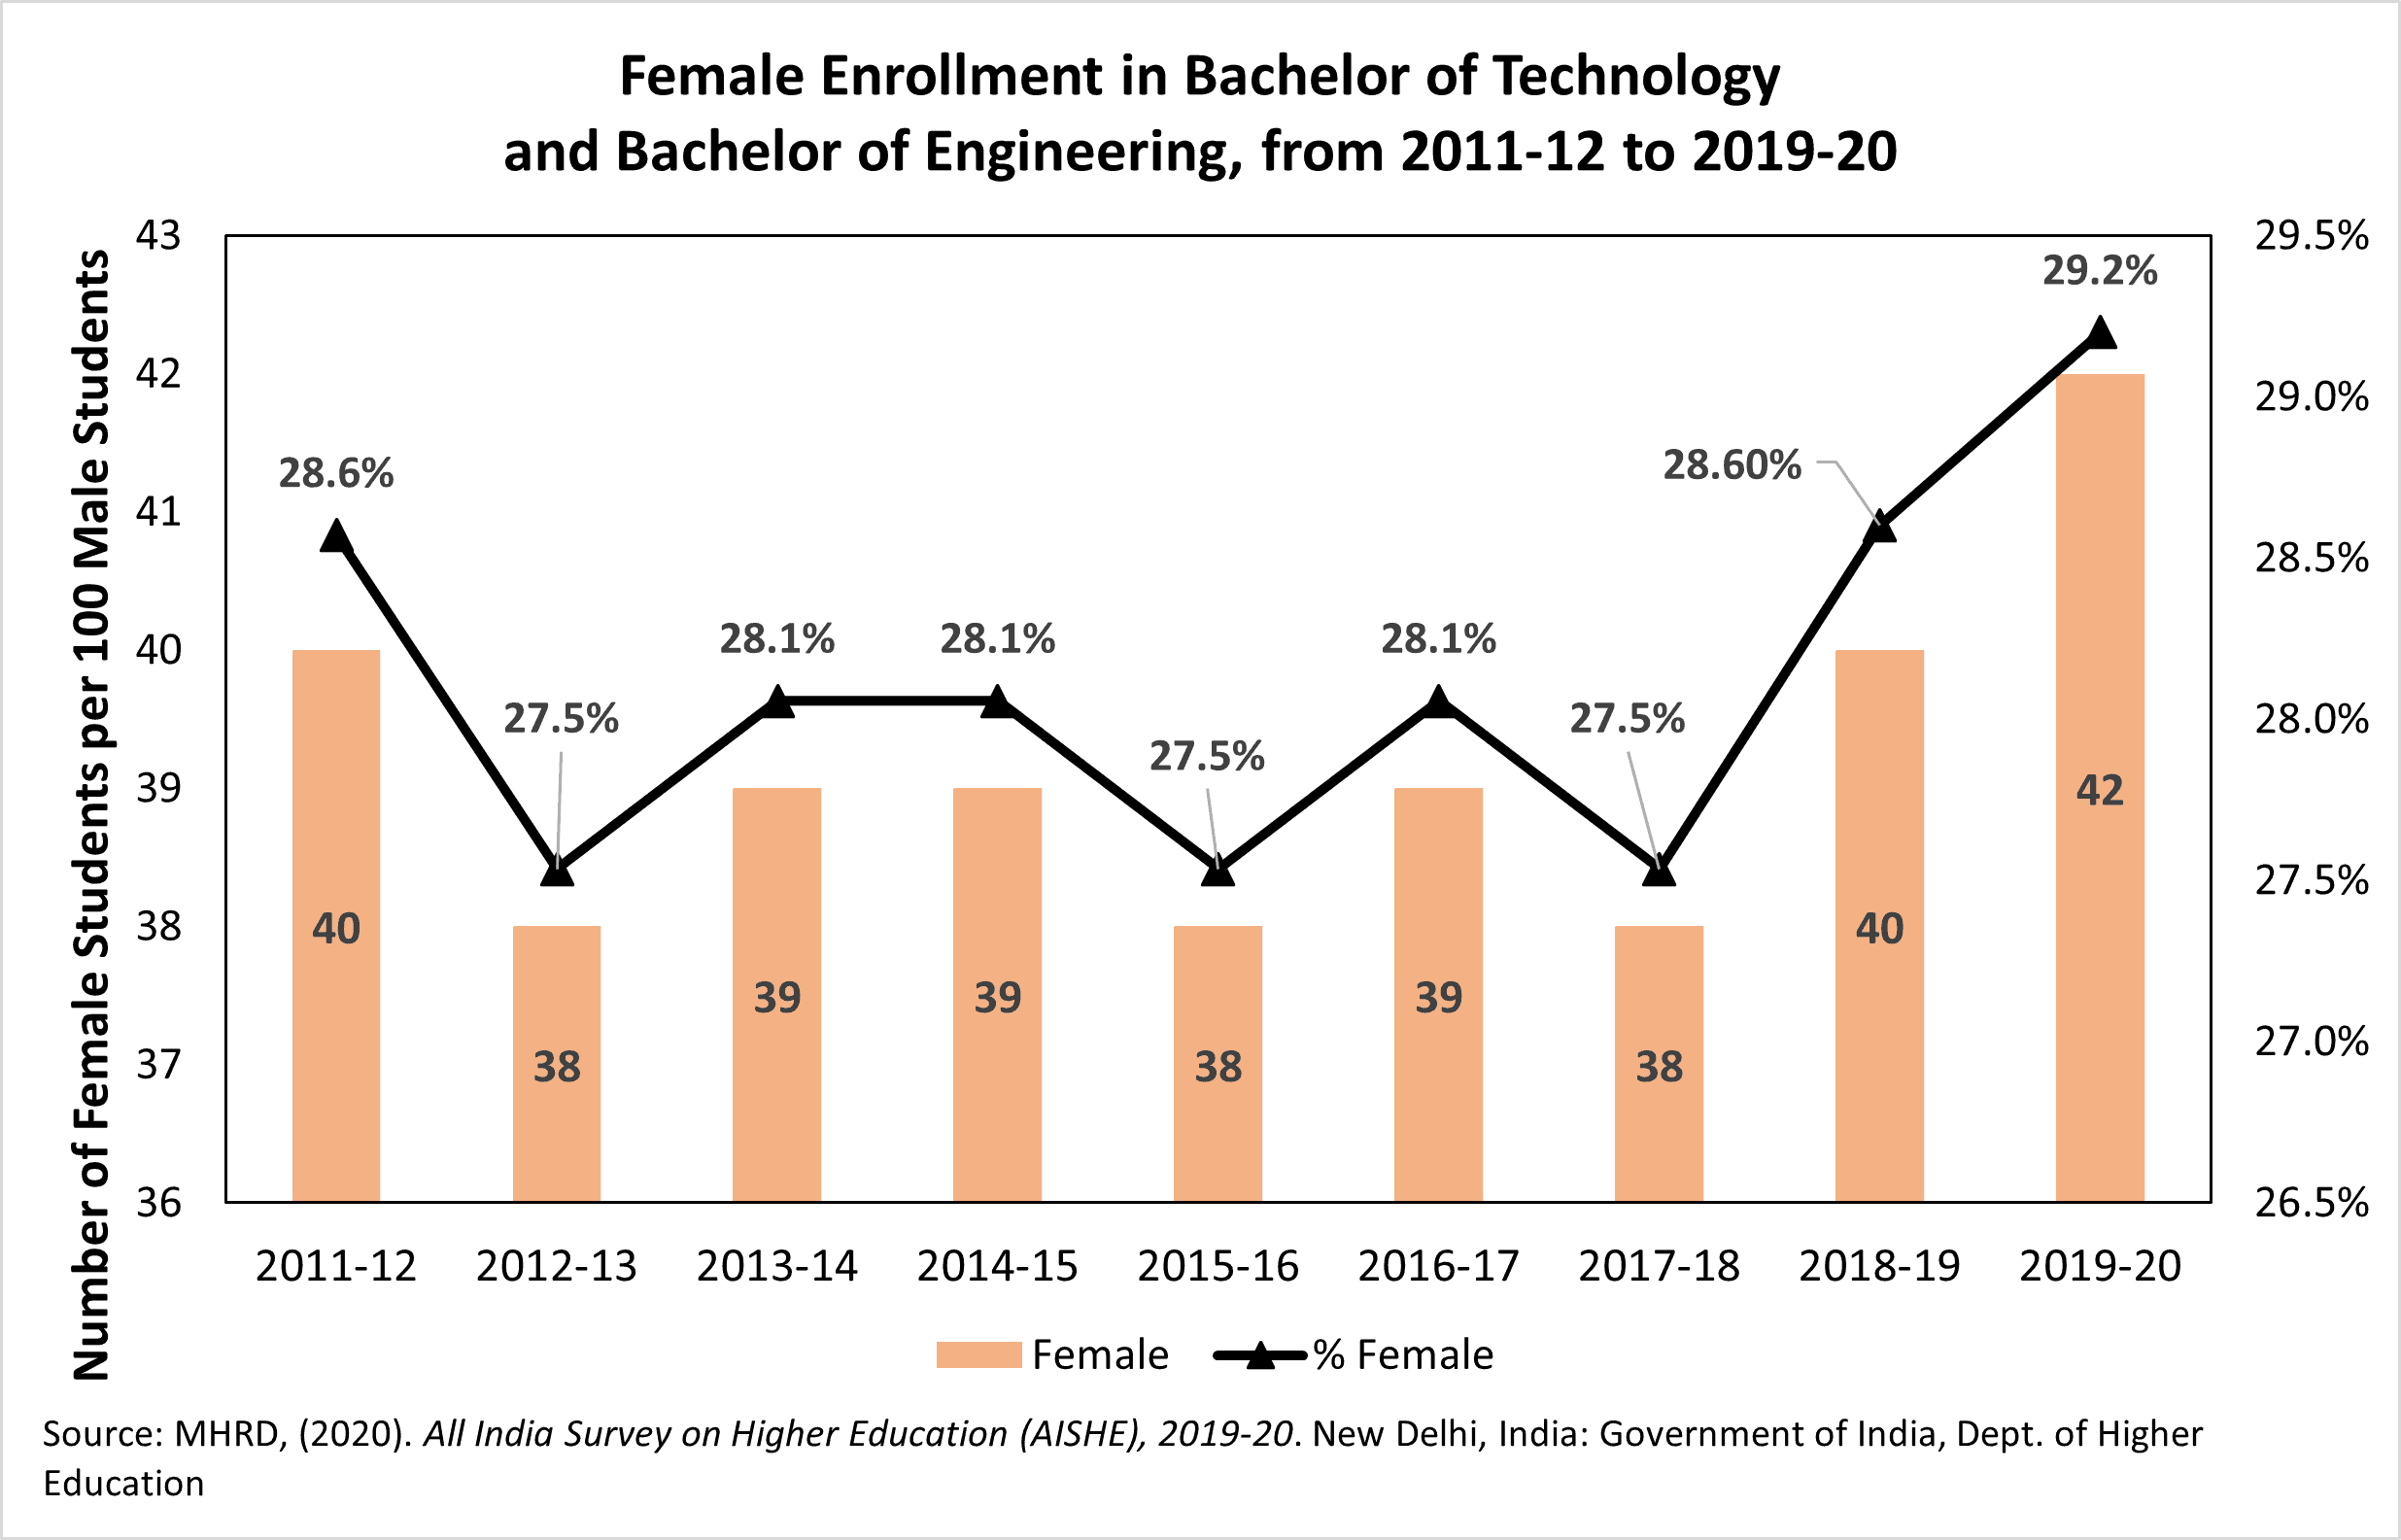 India Bach of Tech and Eng enrollment